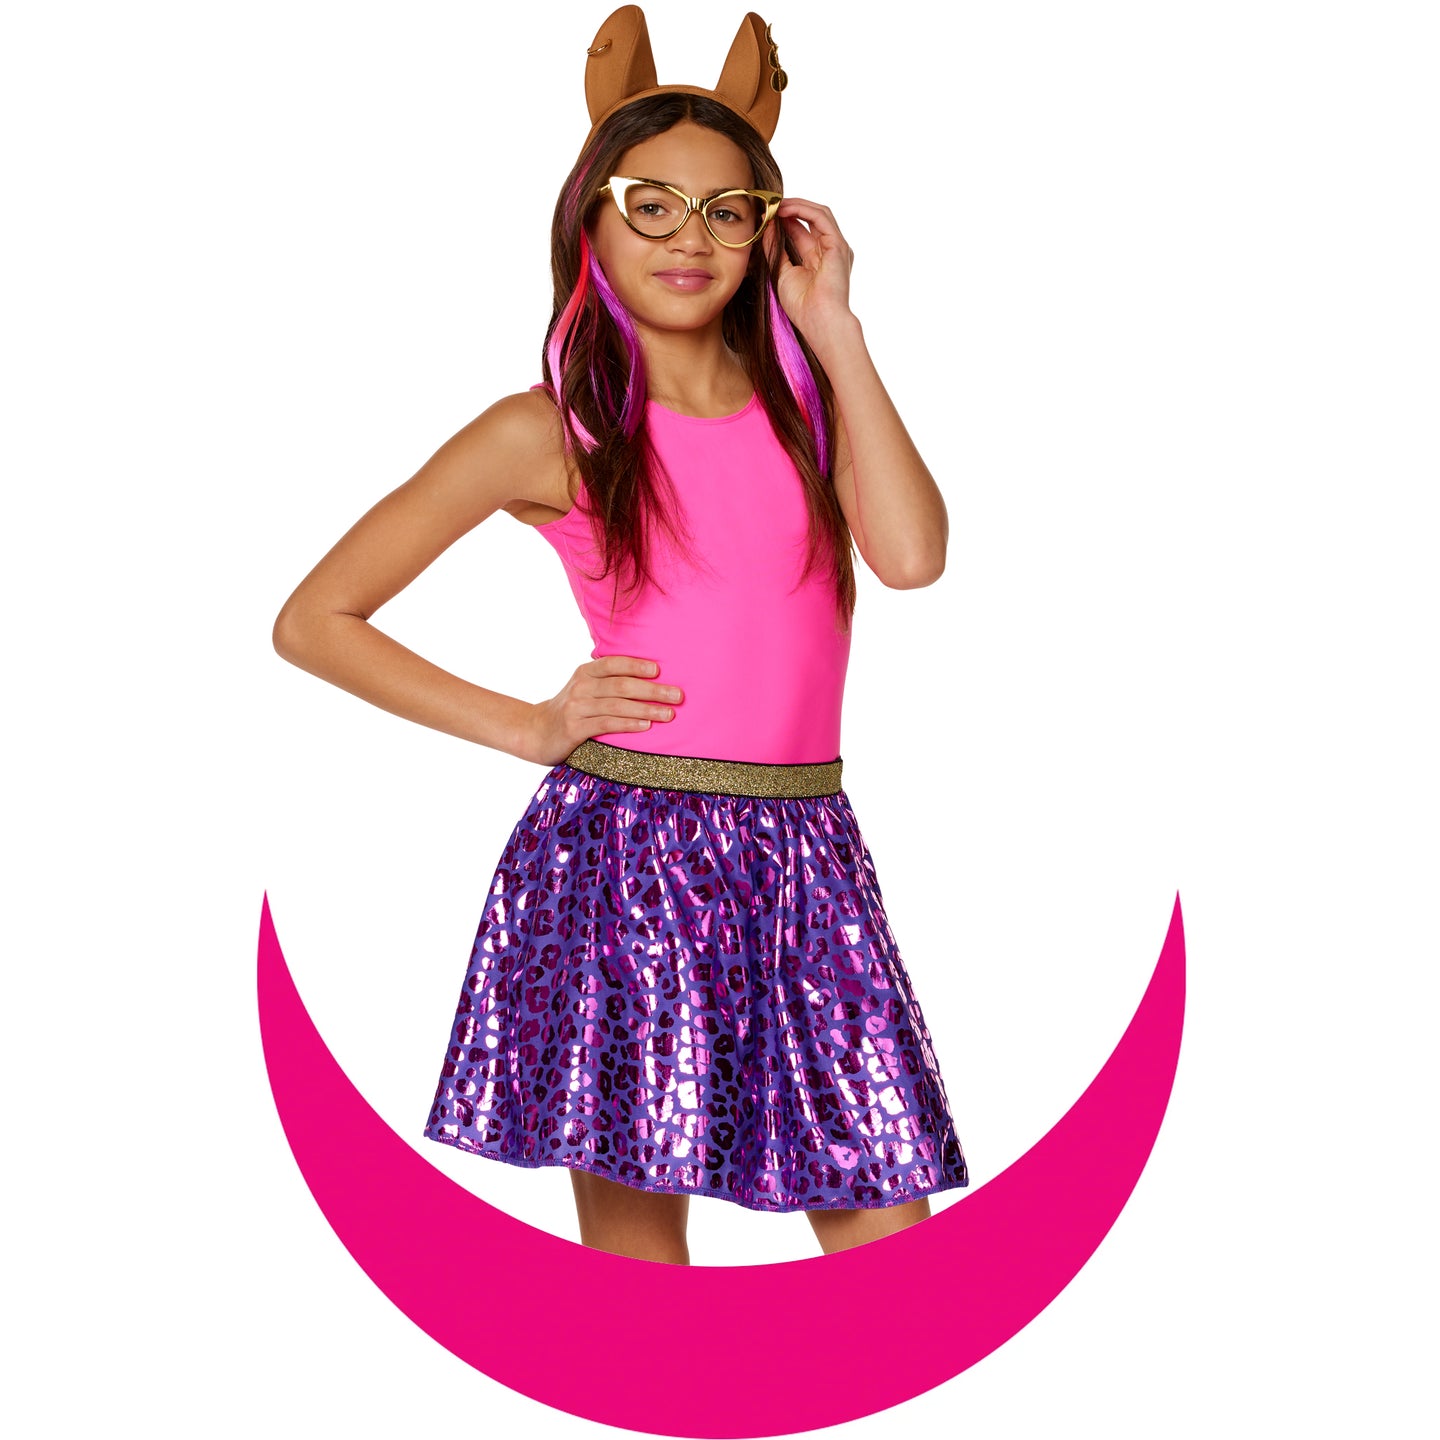 InSpirit Designs Youth Monster High Clawdeen Wolf Costume Kit